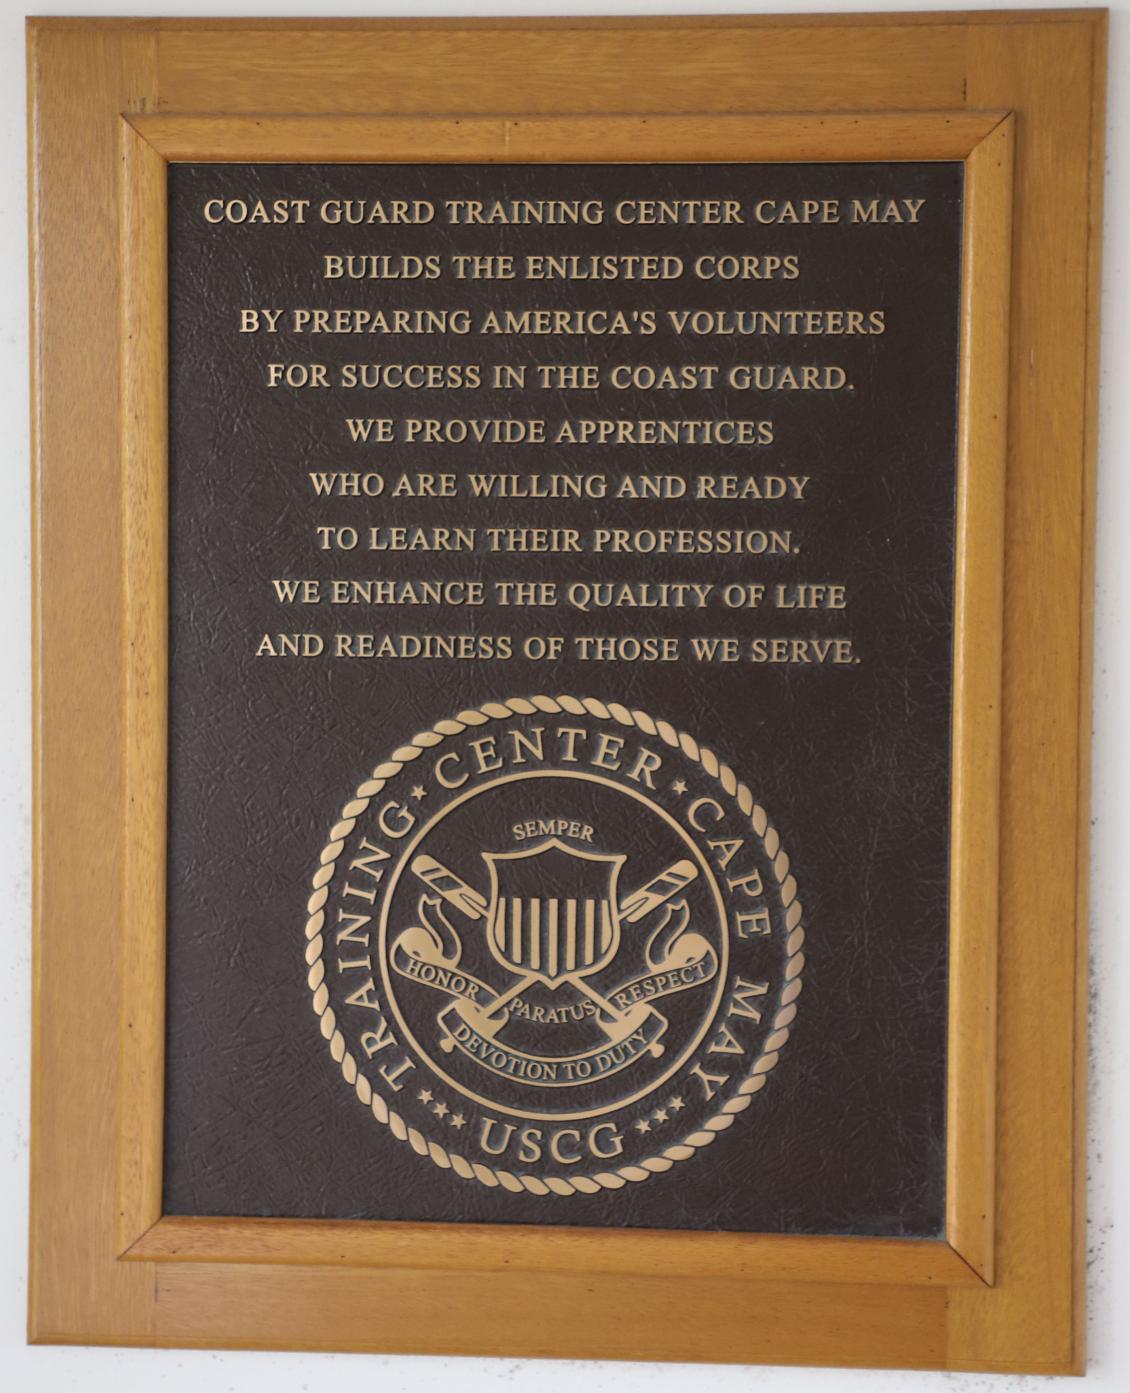 Cape May New Jersey Coast Guard Training Center Mission Statement